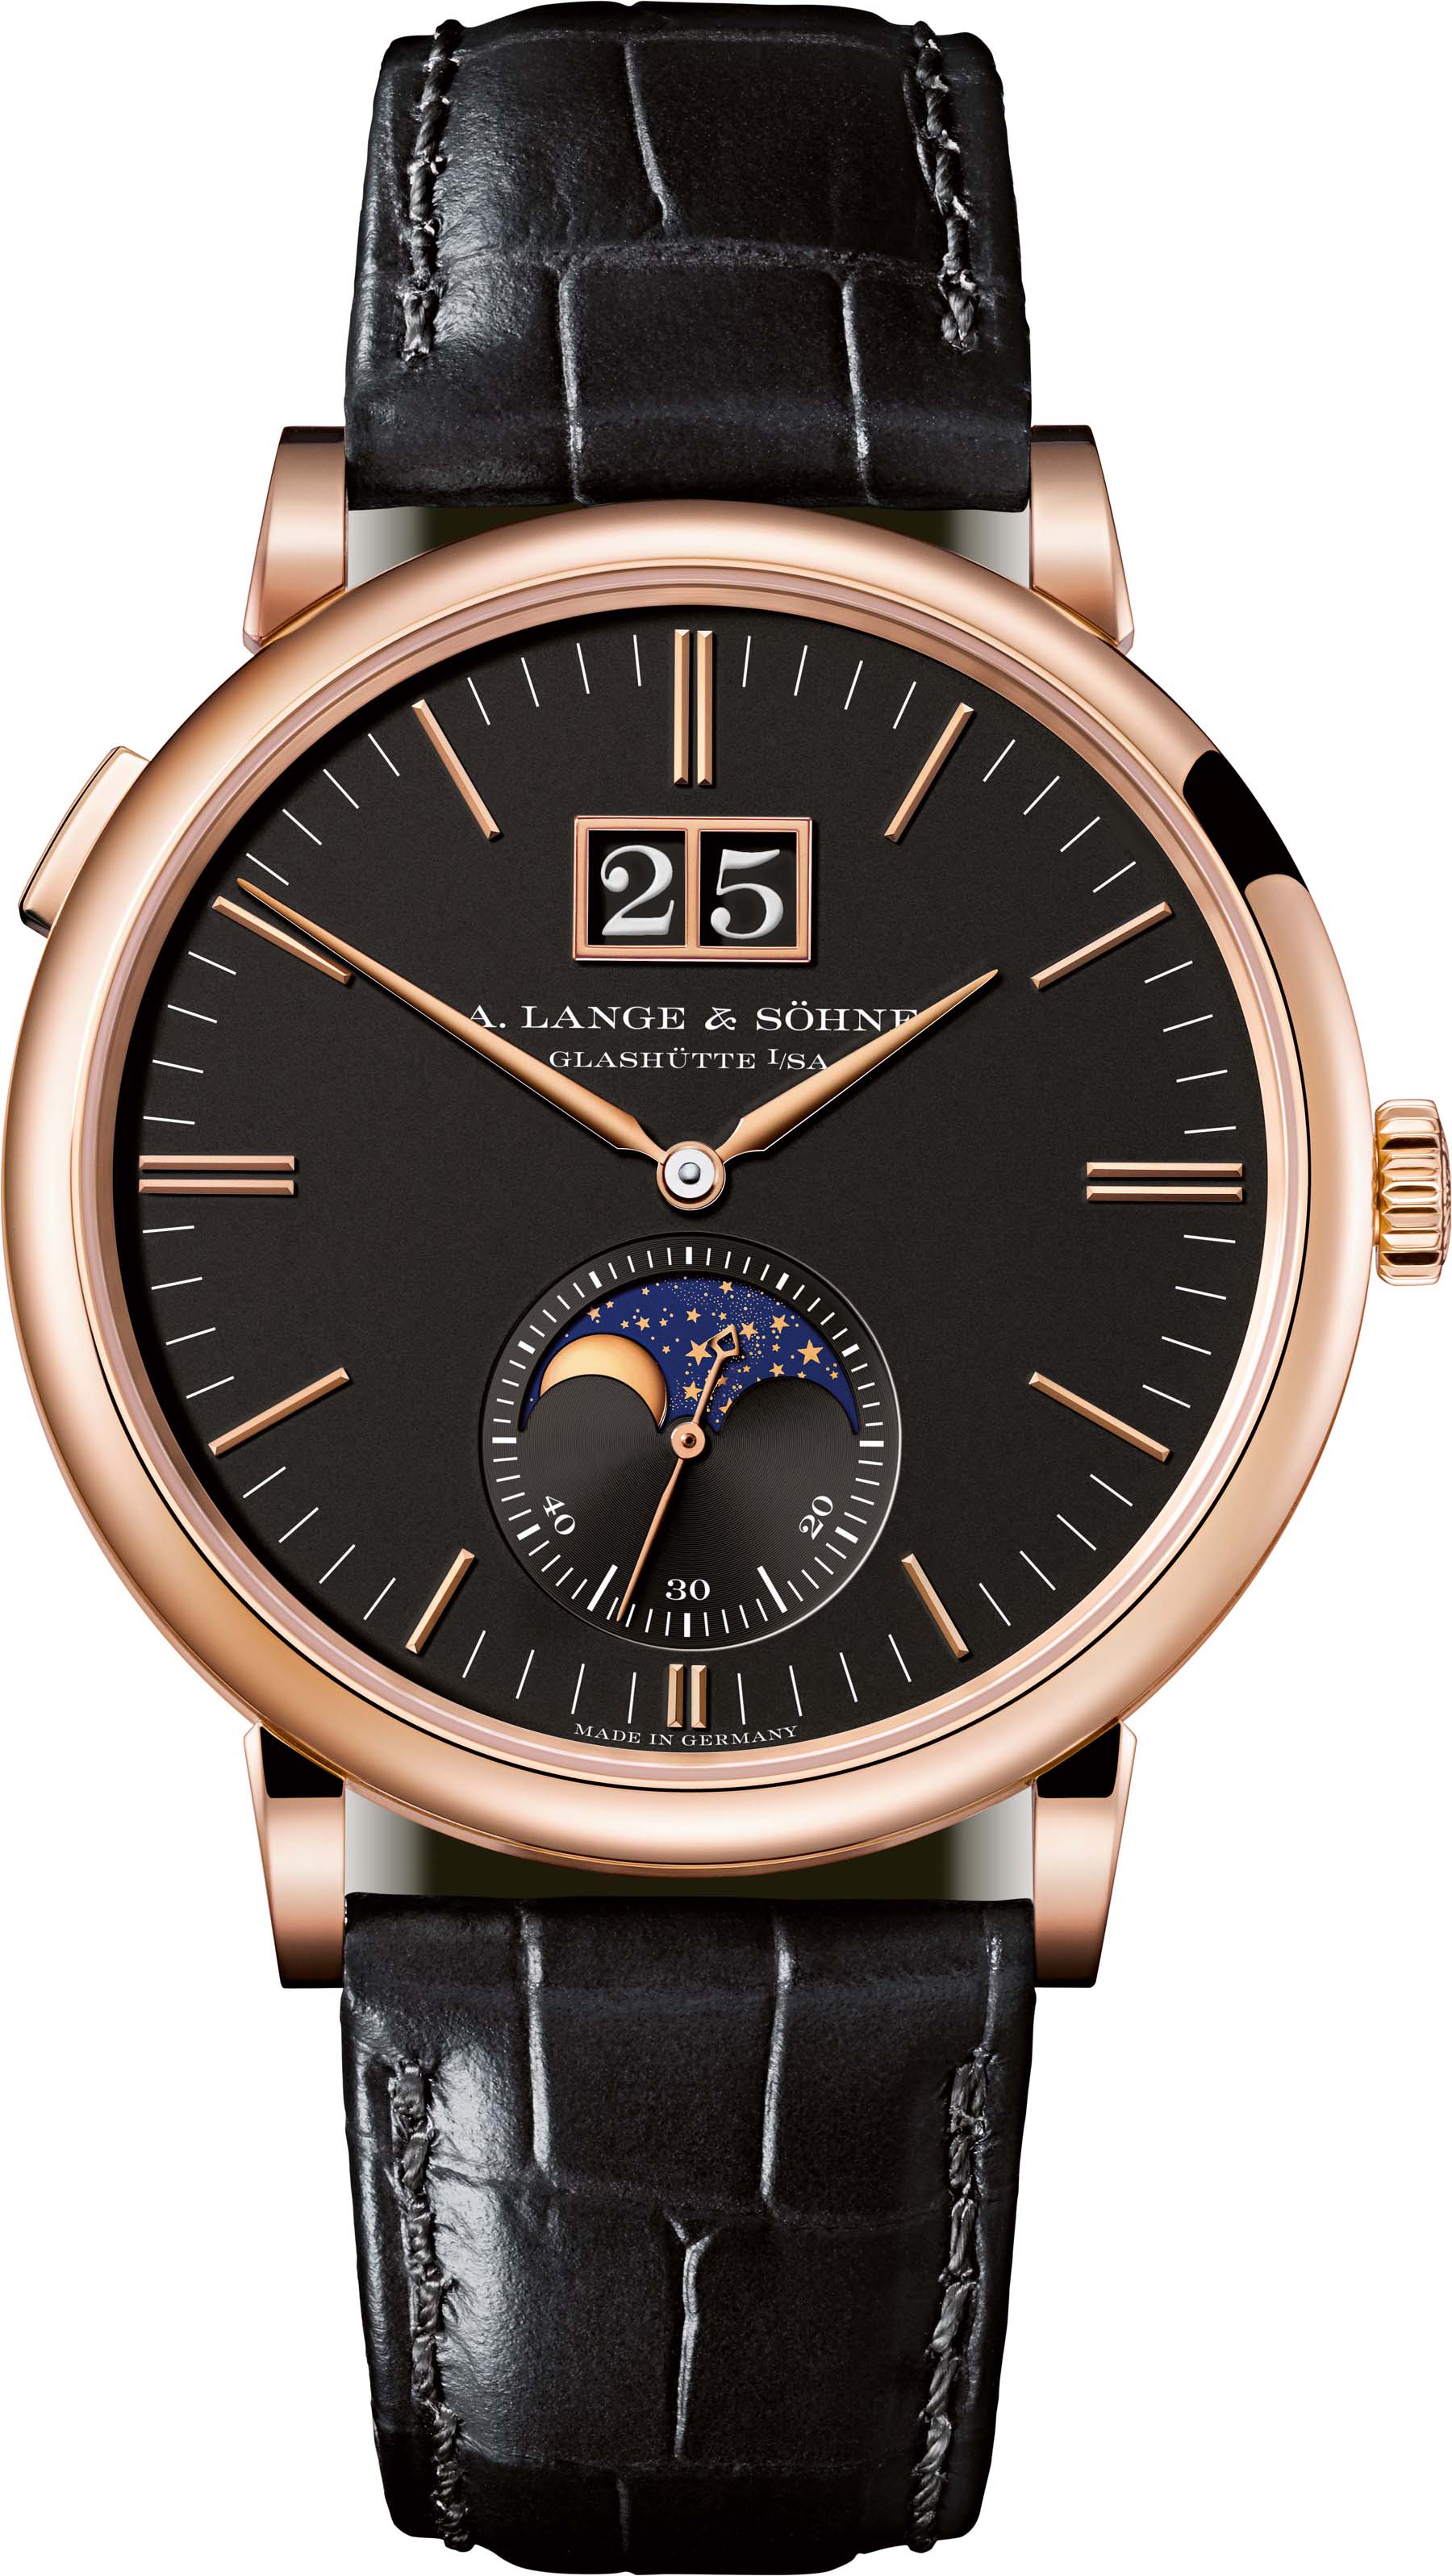 Saxonia Moonphase in pink-gold with black dial